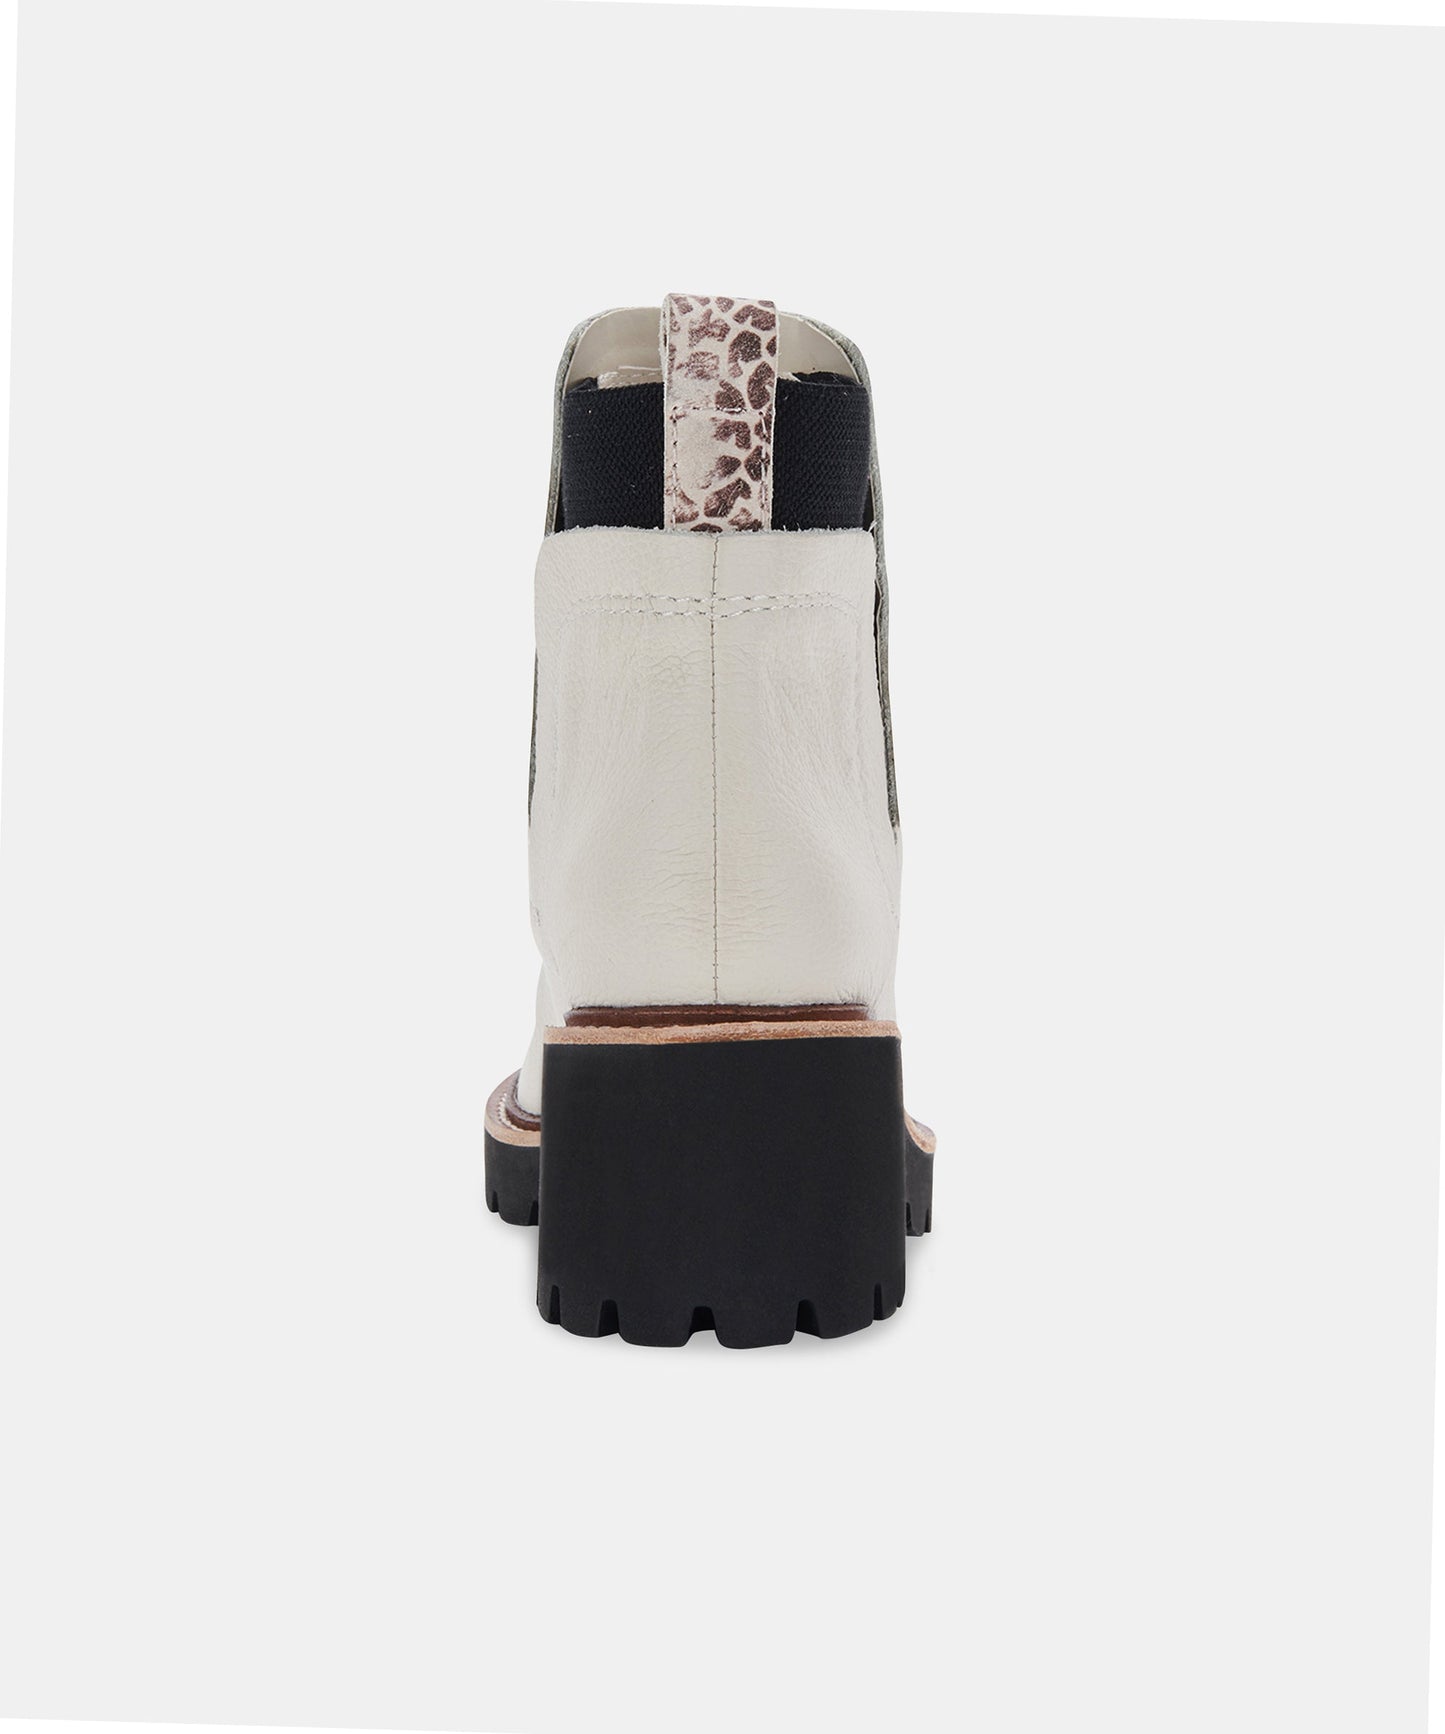 HUEY H2O BOOTS IN IVORY LEATHER -   Dolce Vita